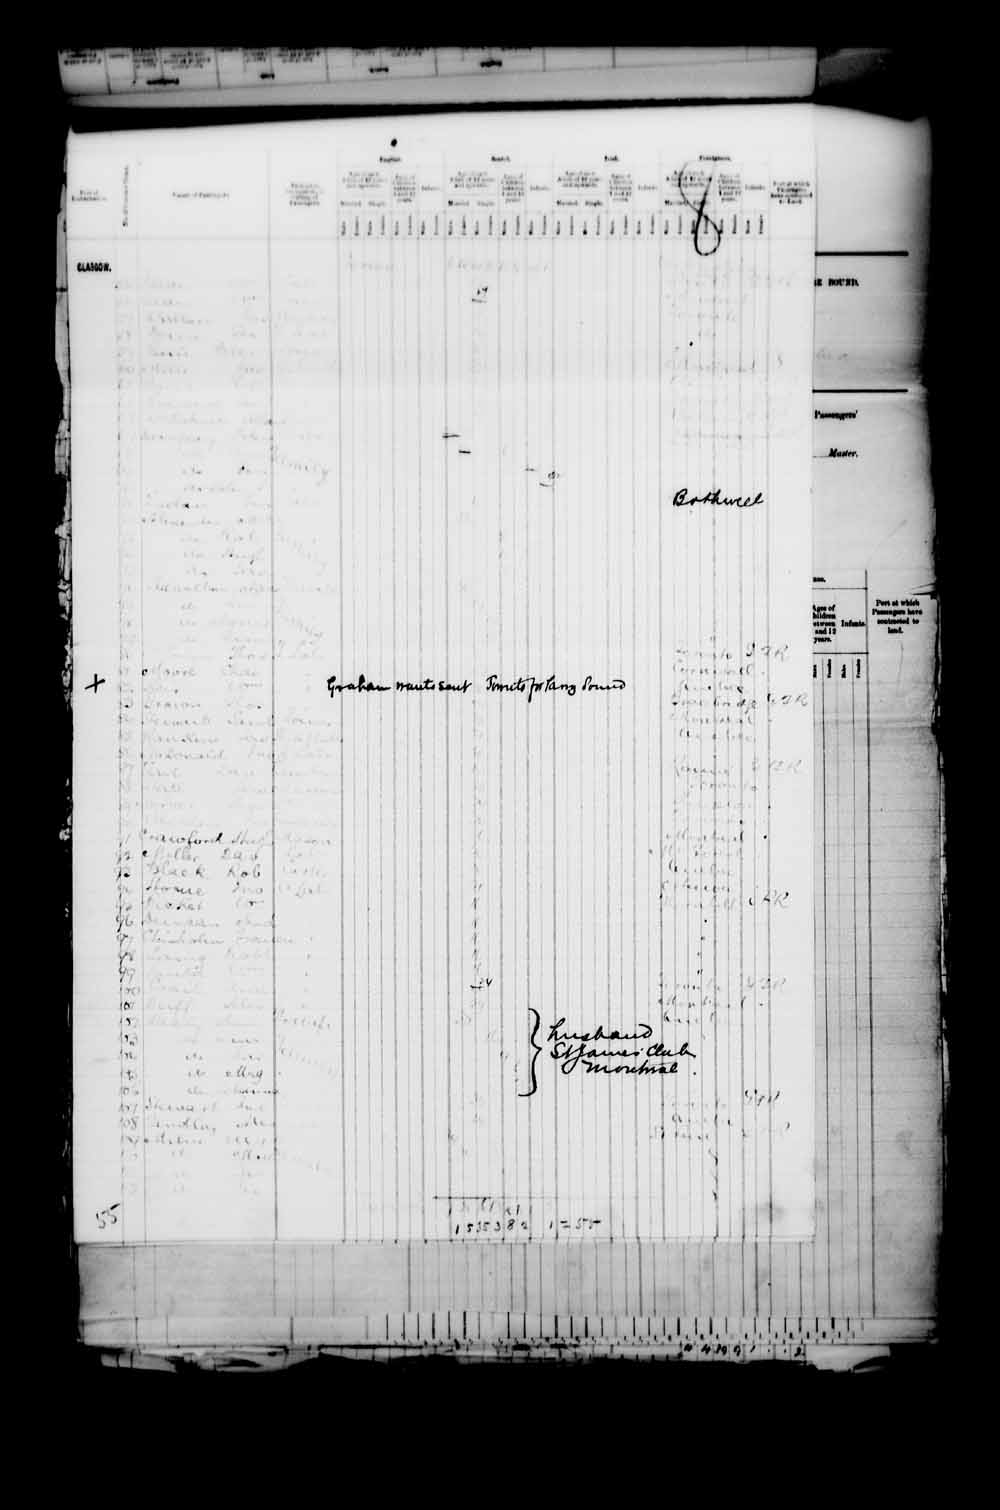 Digitized page of Passenger Lists for Image No.: e003546730